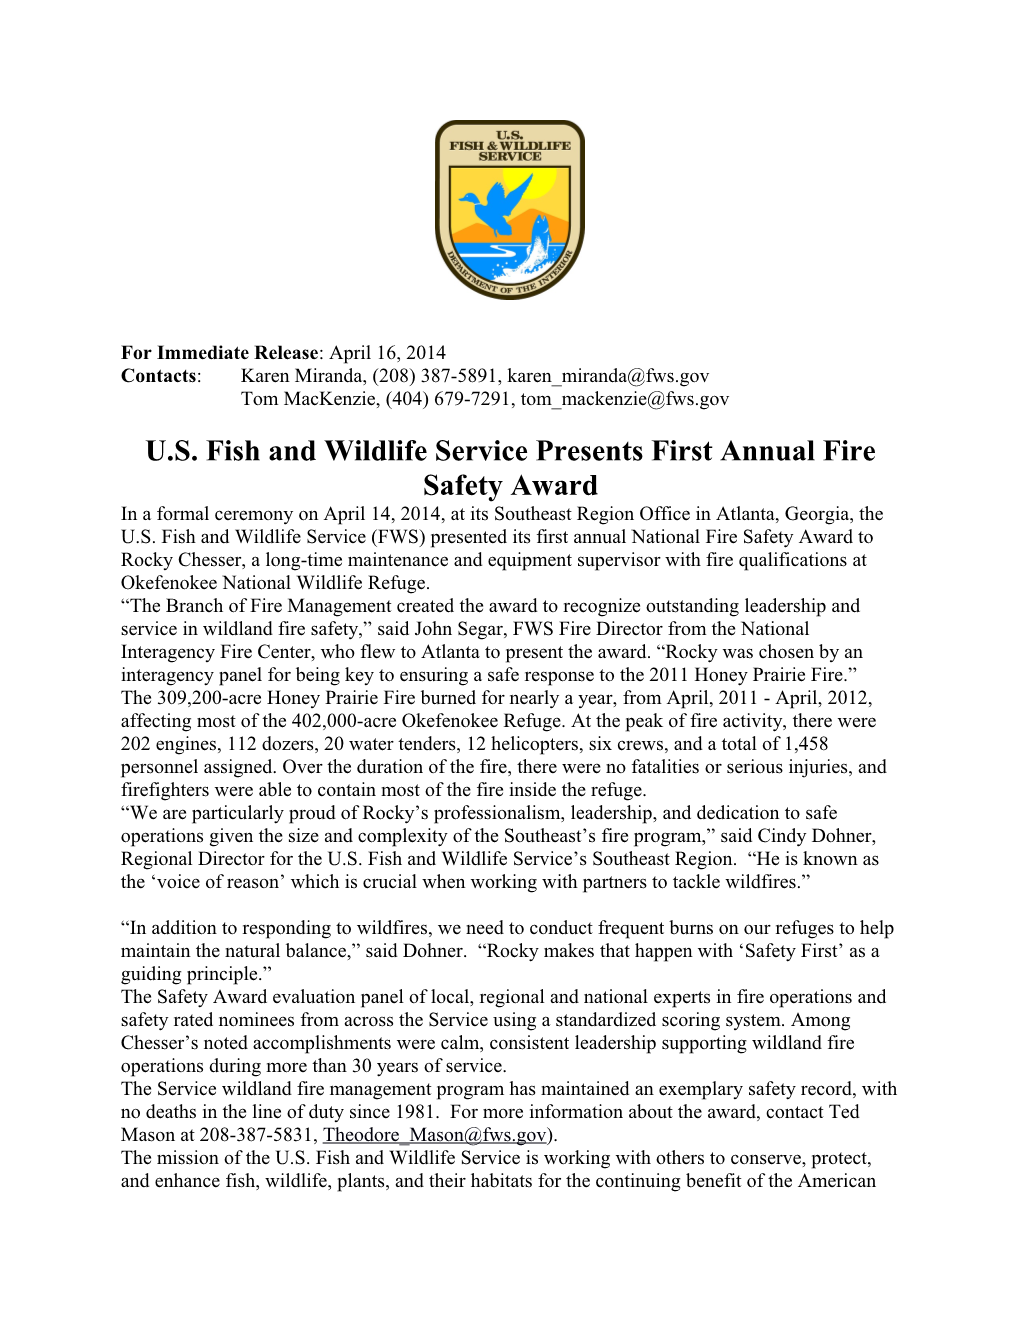 U.S. Fish and Wildlife Service Presents First Annual Fire Safety Award